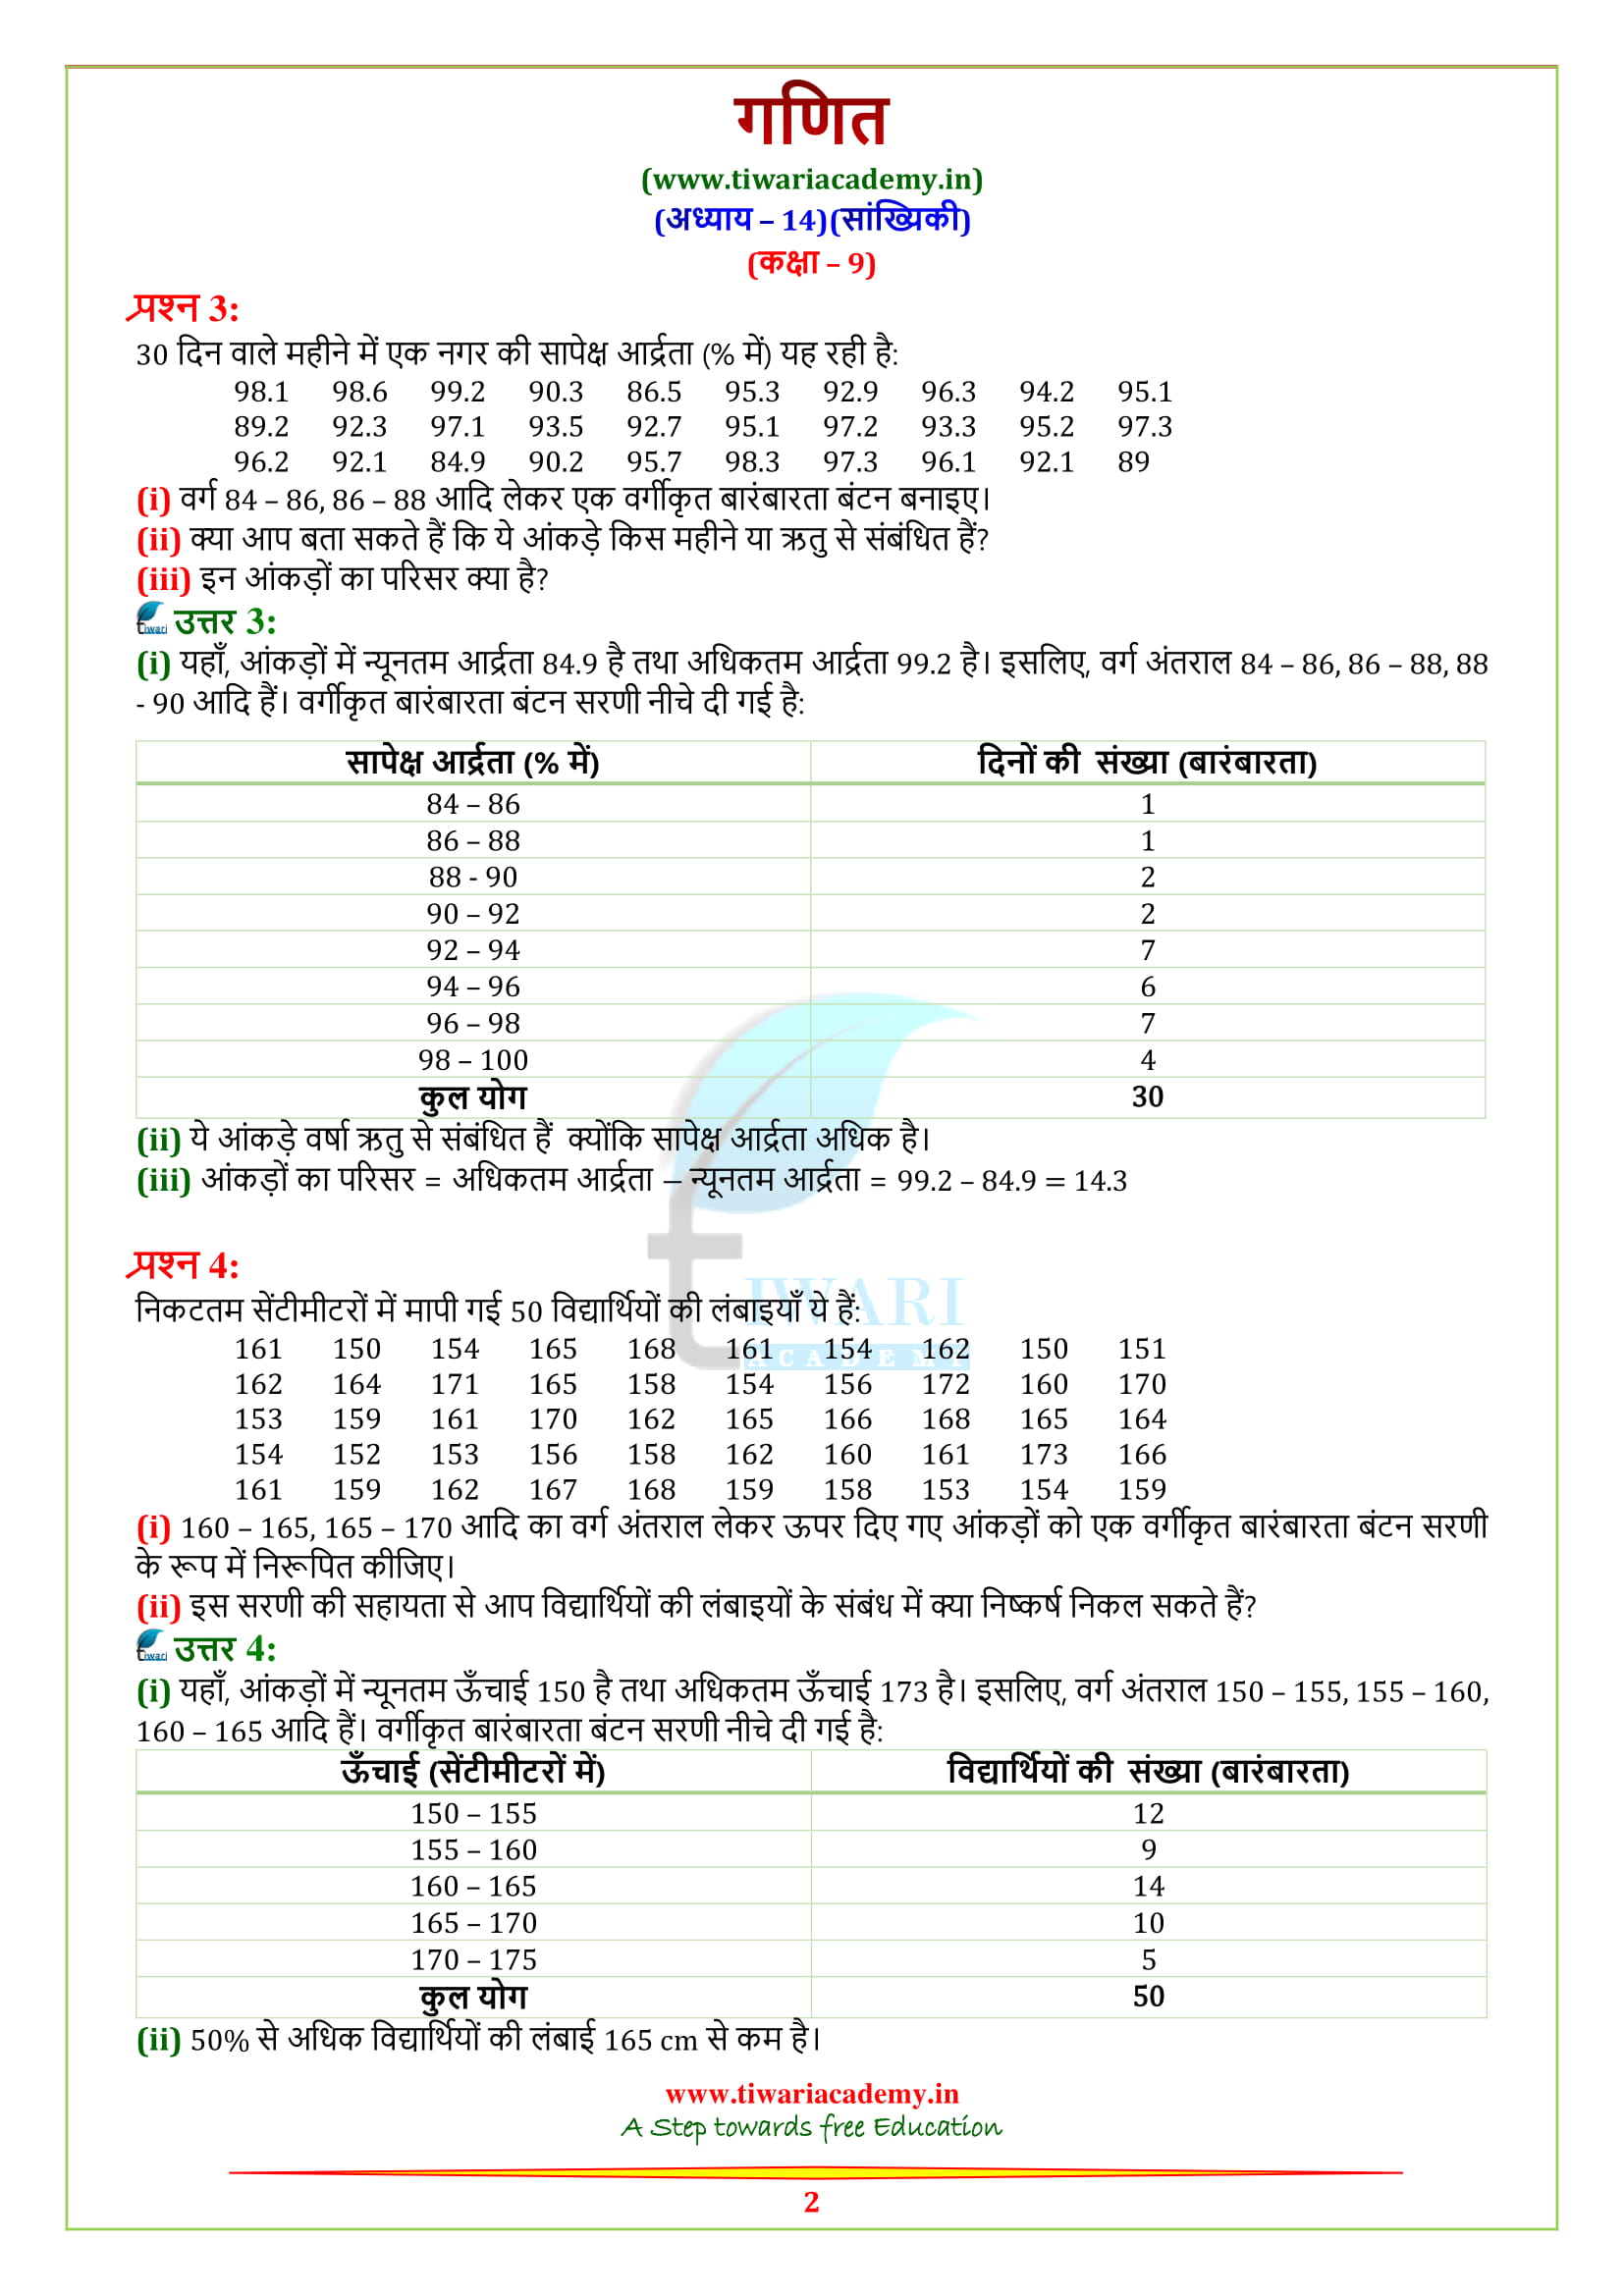 NCERT Solutions for Class 9 Maths Chapter 14 Exercise 14.2 in hindi medium updated for 2020 – 2021